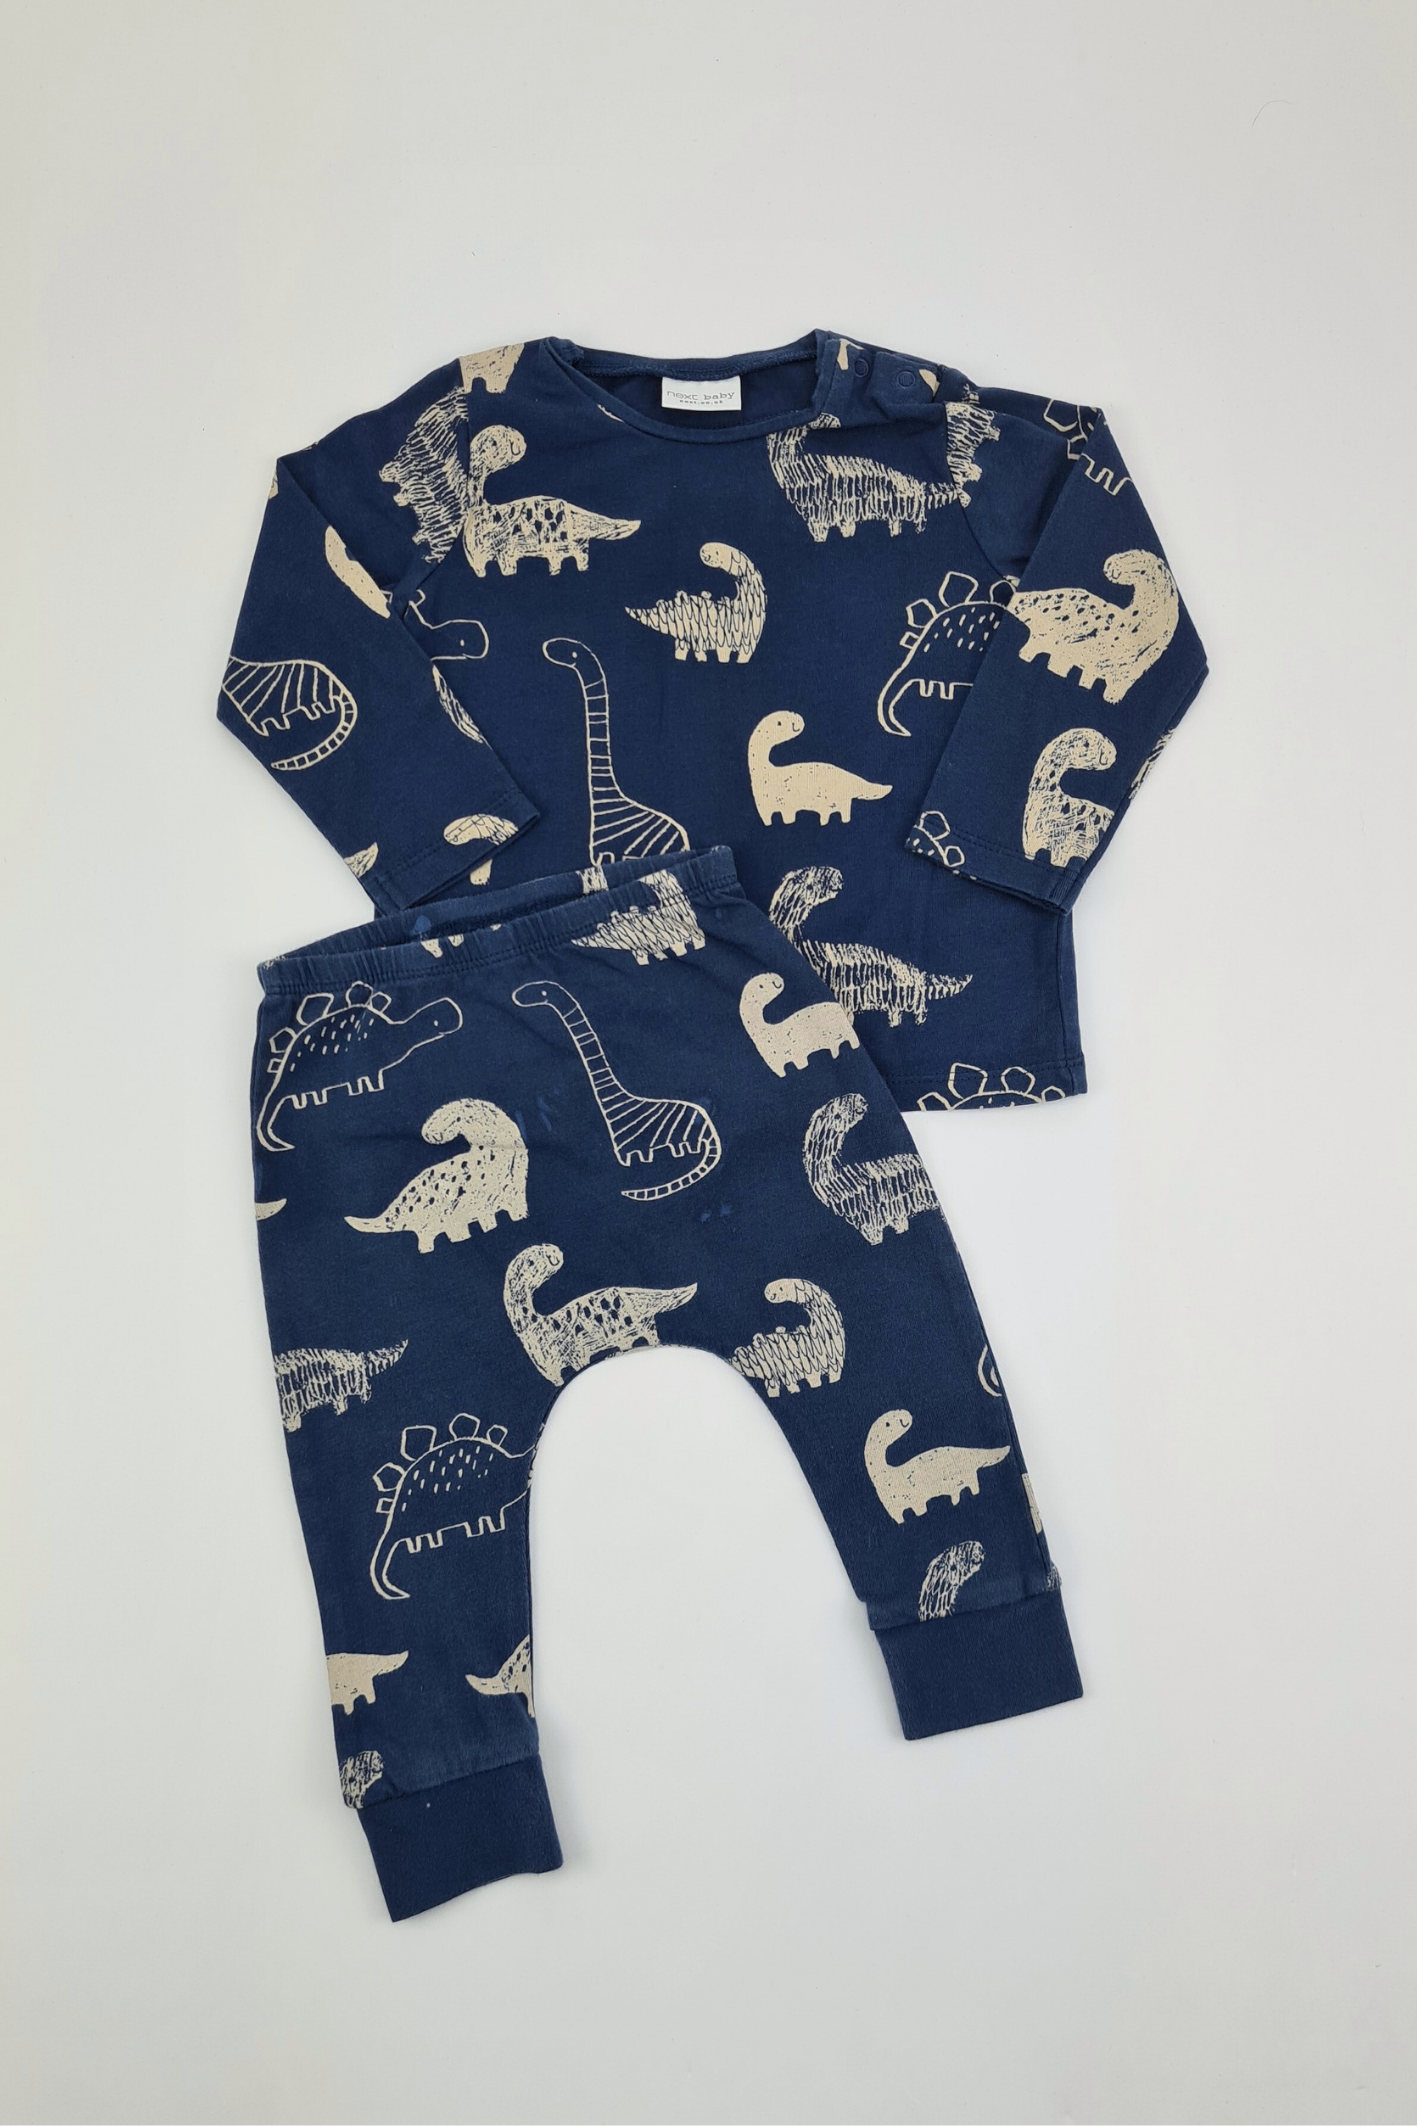 6–9 Monate – Outfit mit Dinosaurier-Print (Weiter)